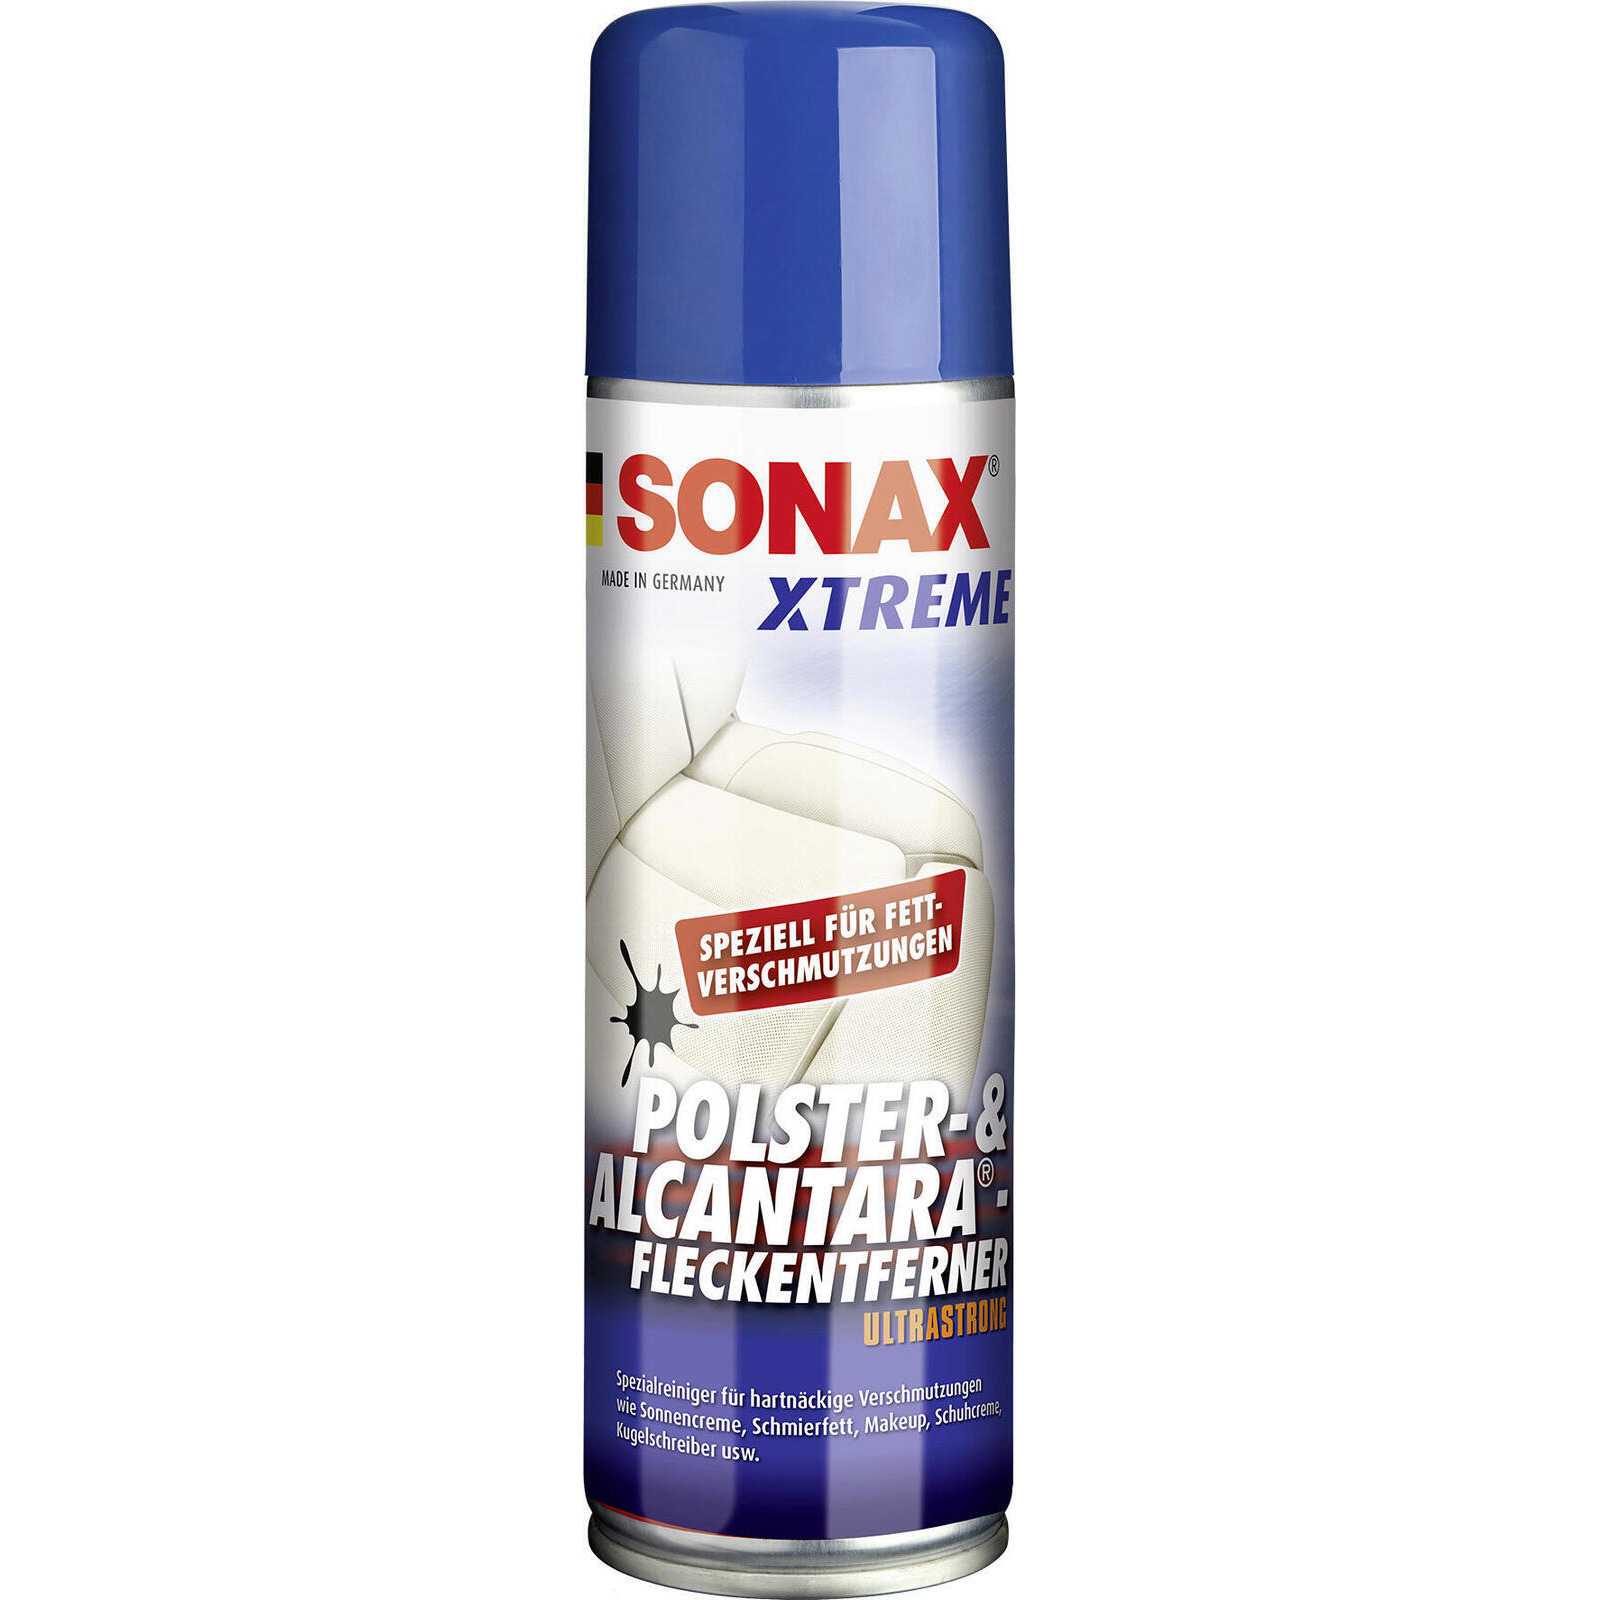 SONAX Textile / Carpet Cleaner XTREME Upholstery+Alcantara Stain Remover